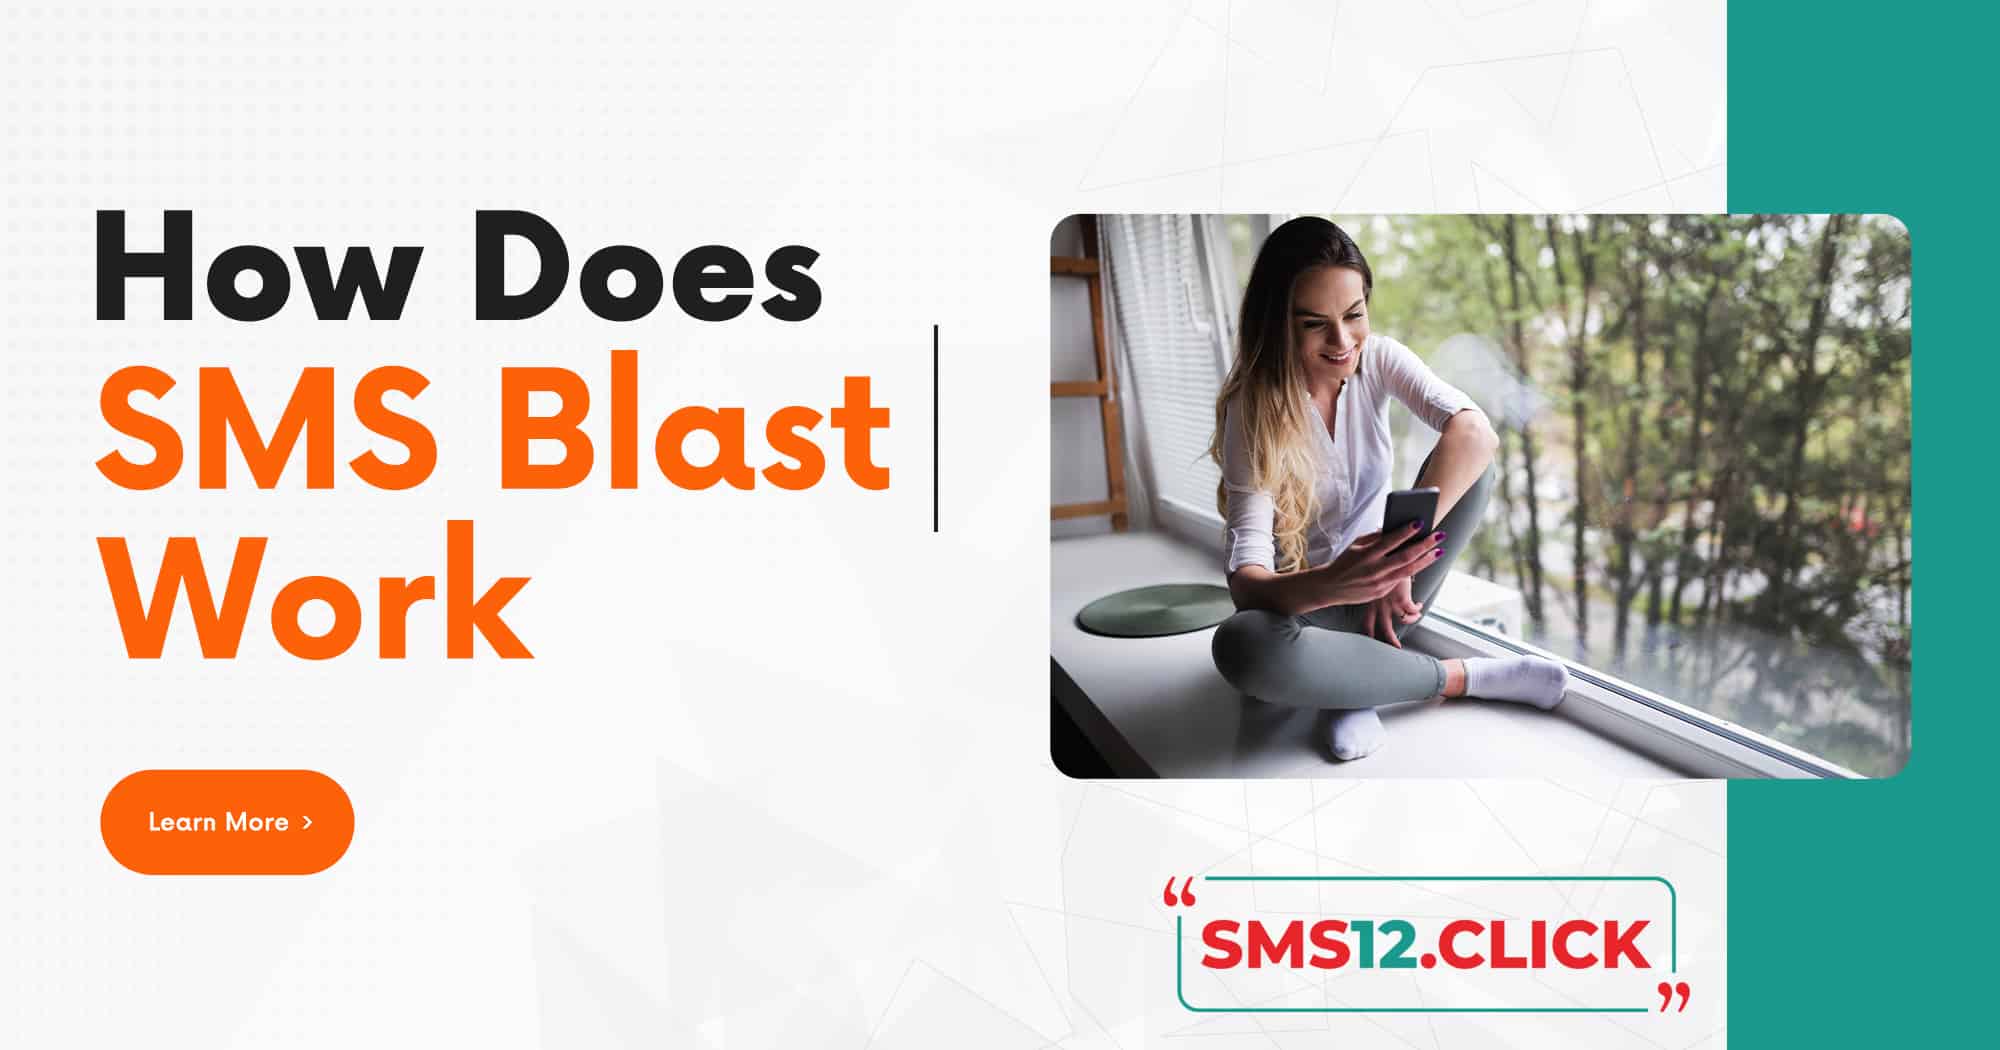 How does SMS Blast Work